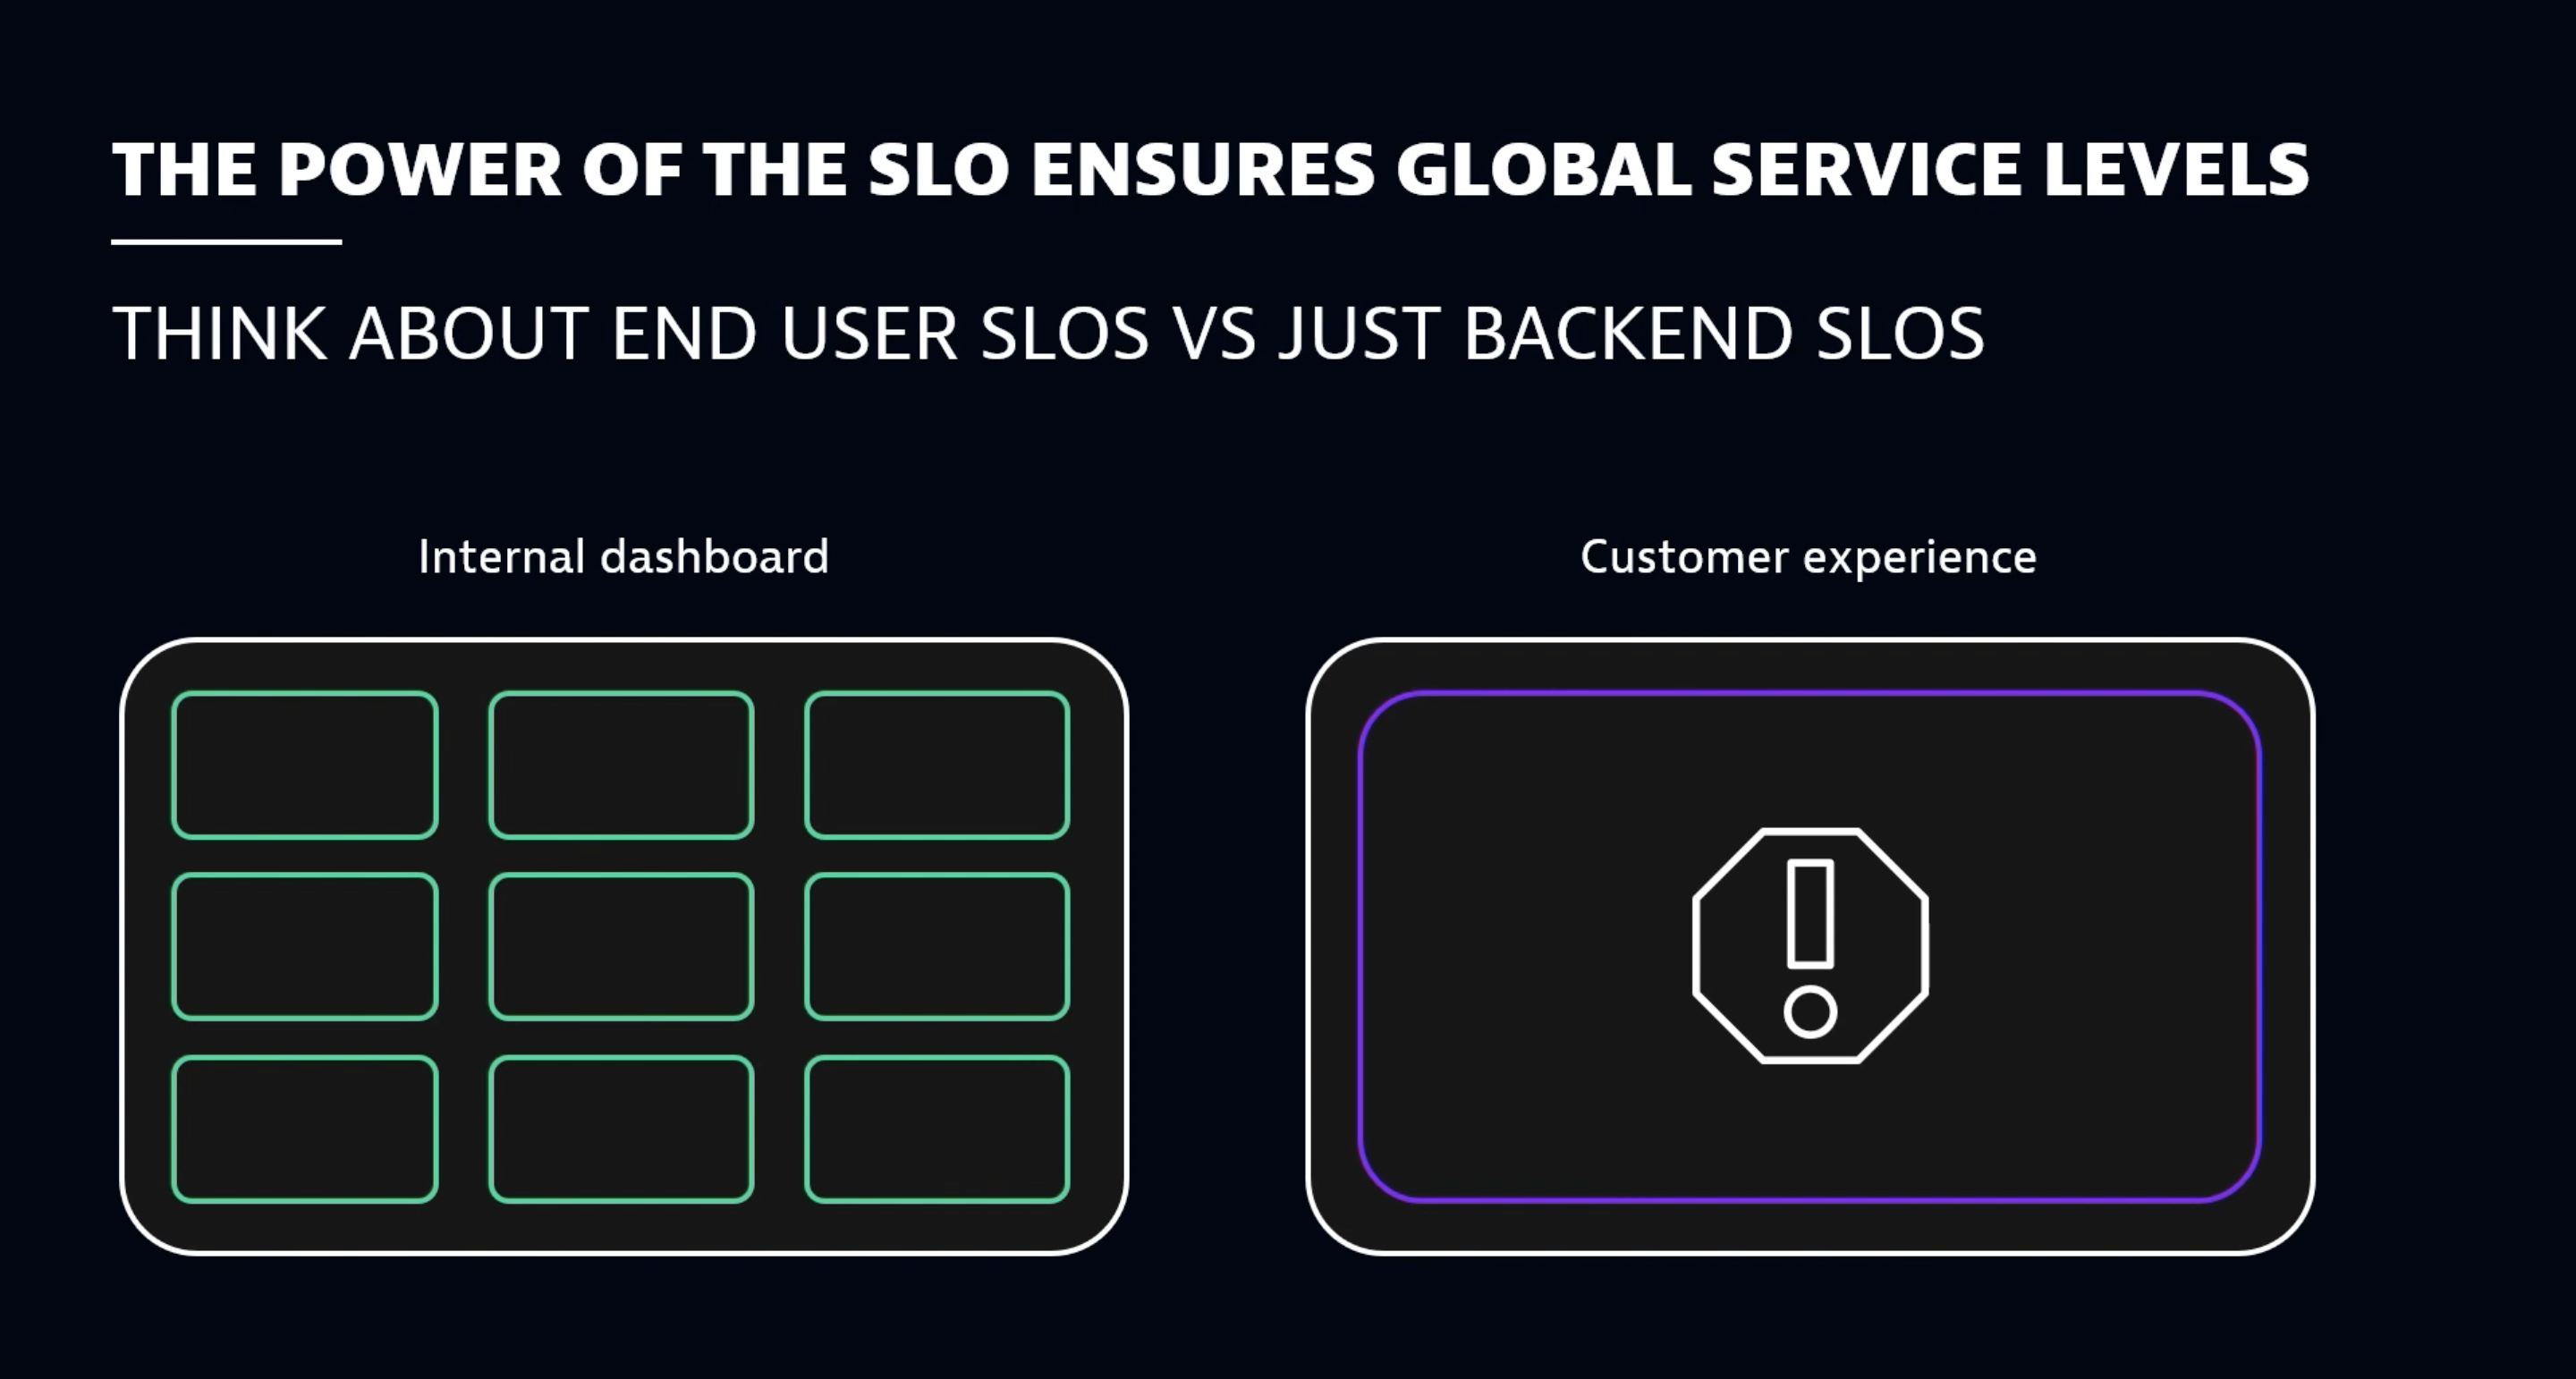 The power of the SLO ensures global service levels